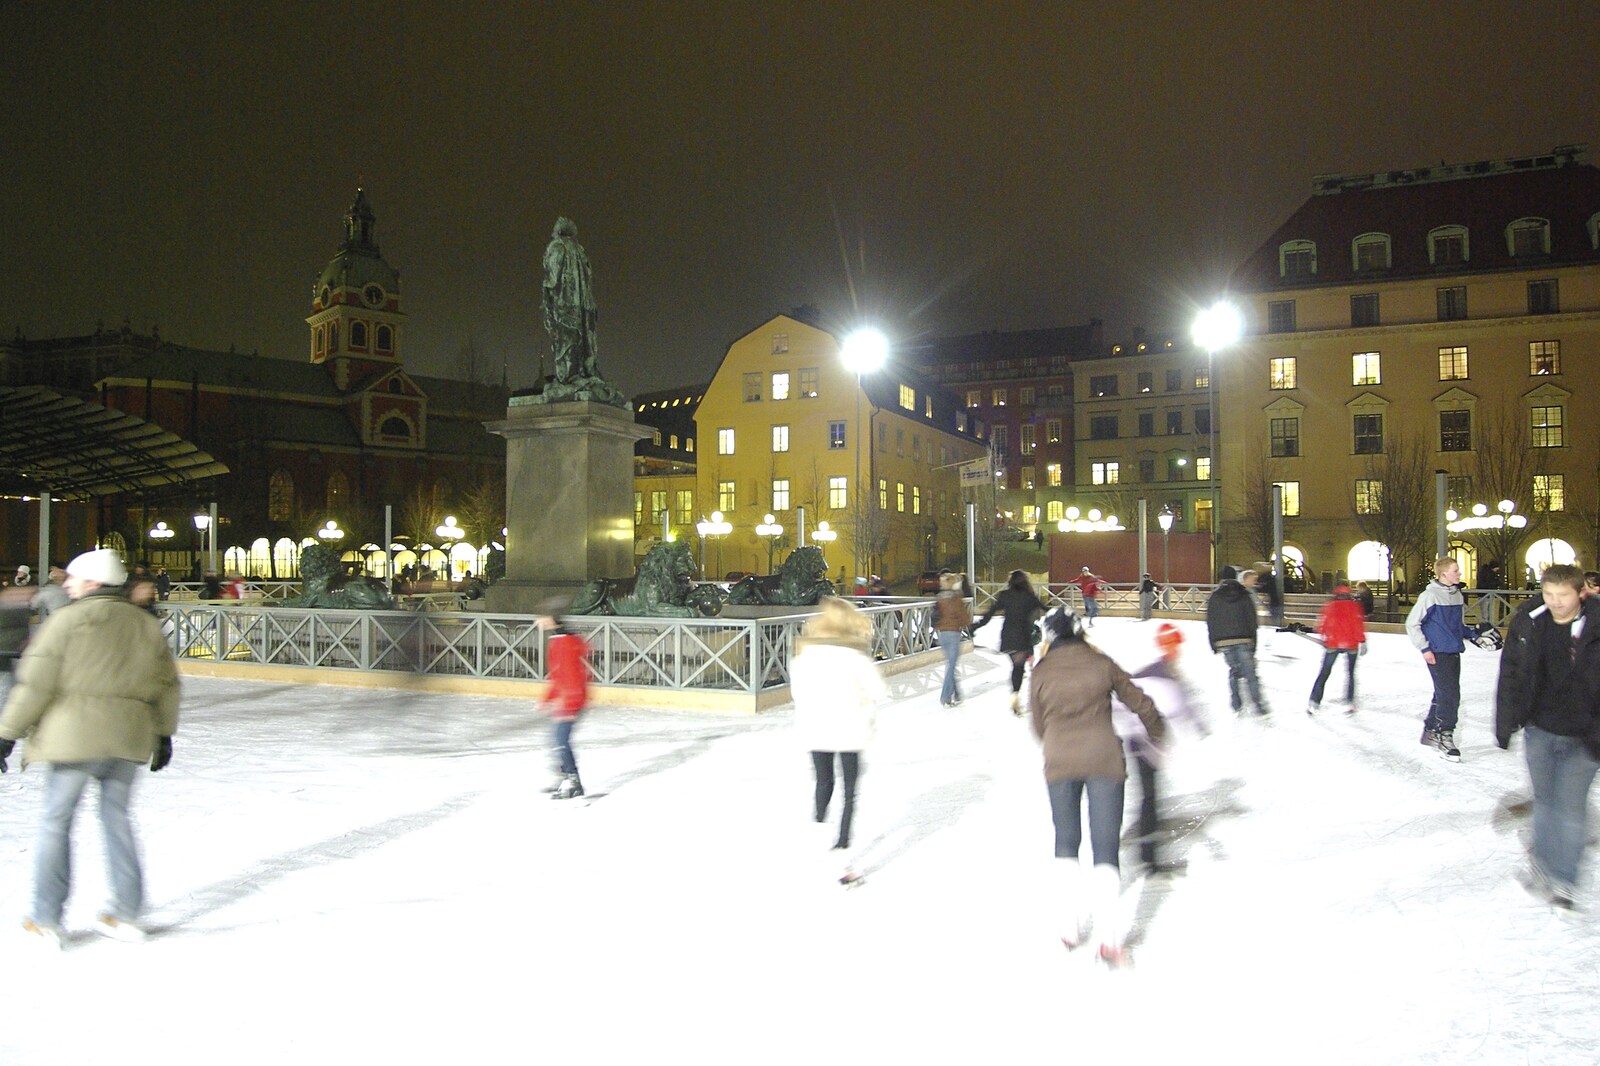 A temporary ice-rink at the Christmas market from Gamla Stan, Stockholm, Sweden - 15th December 2007